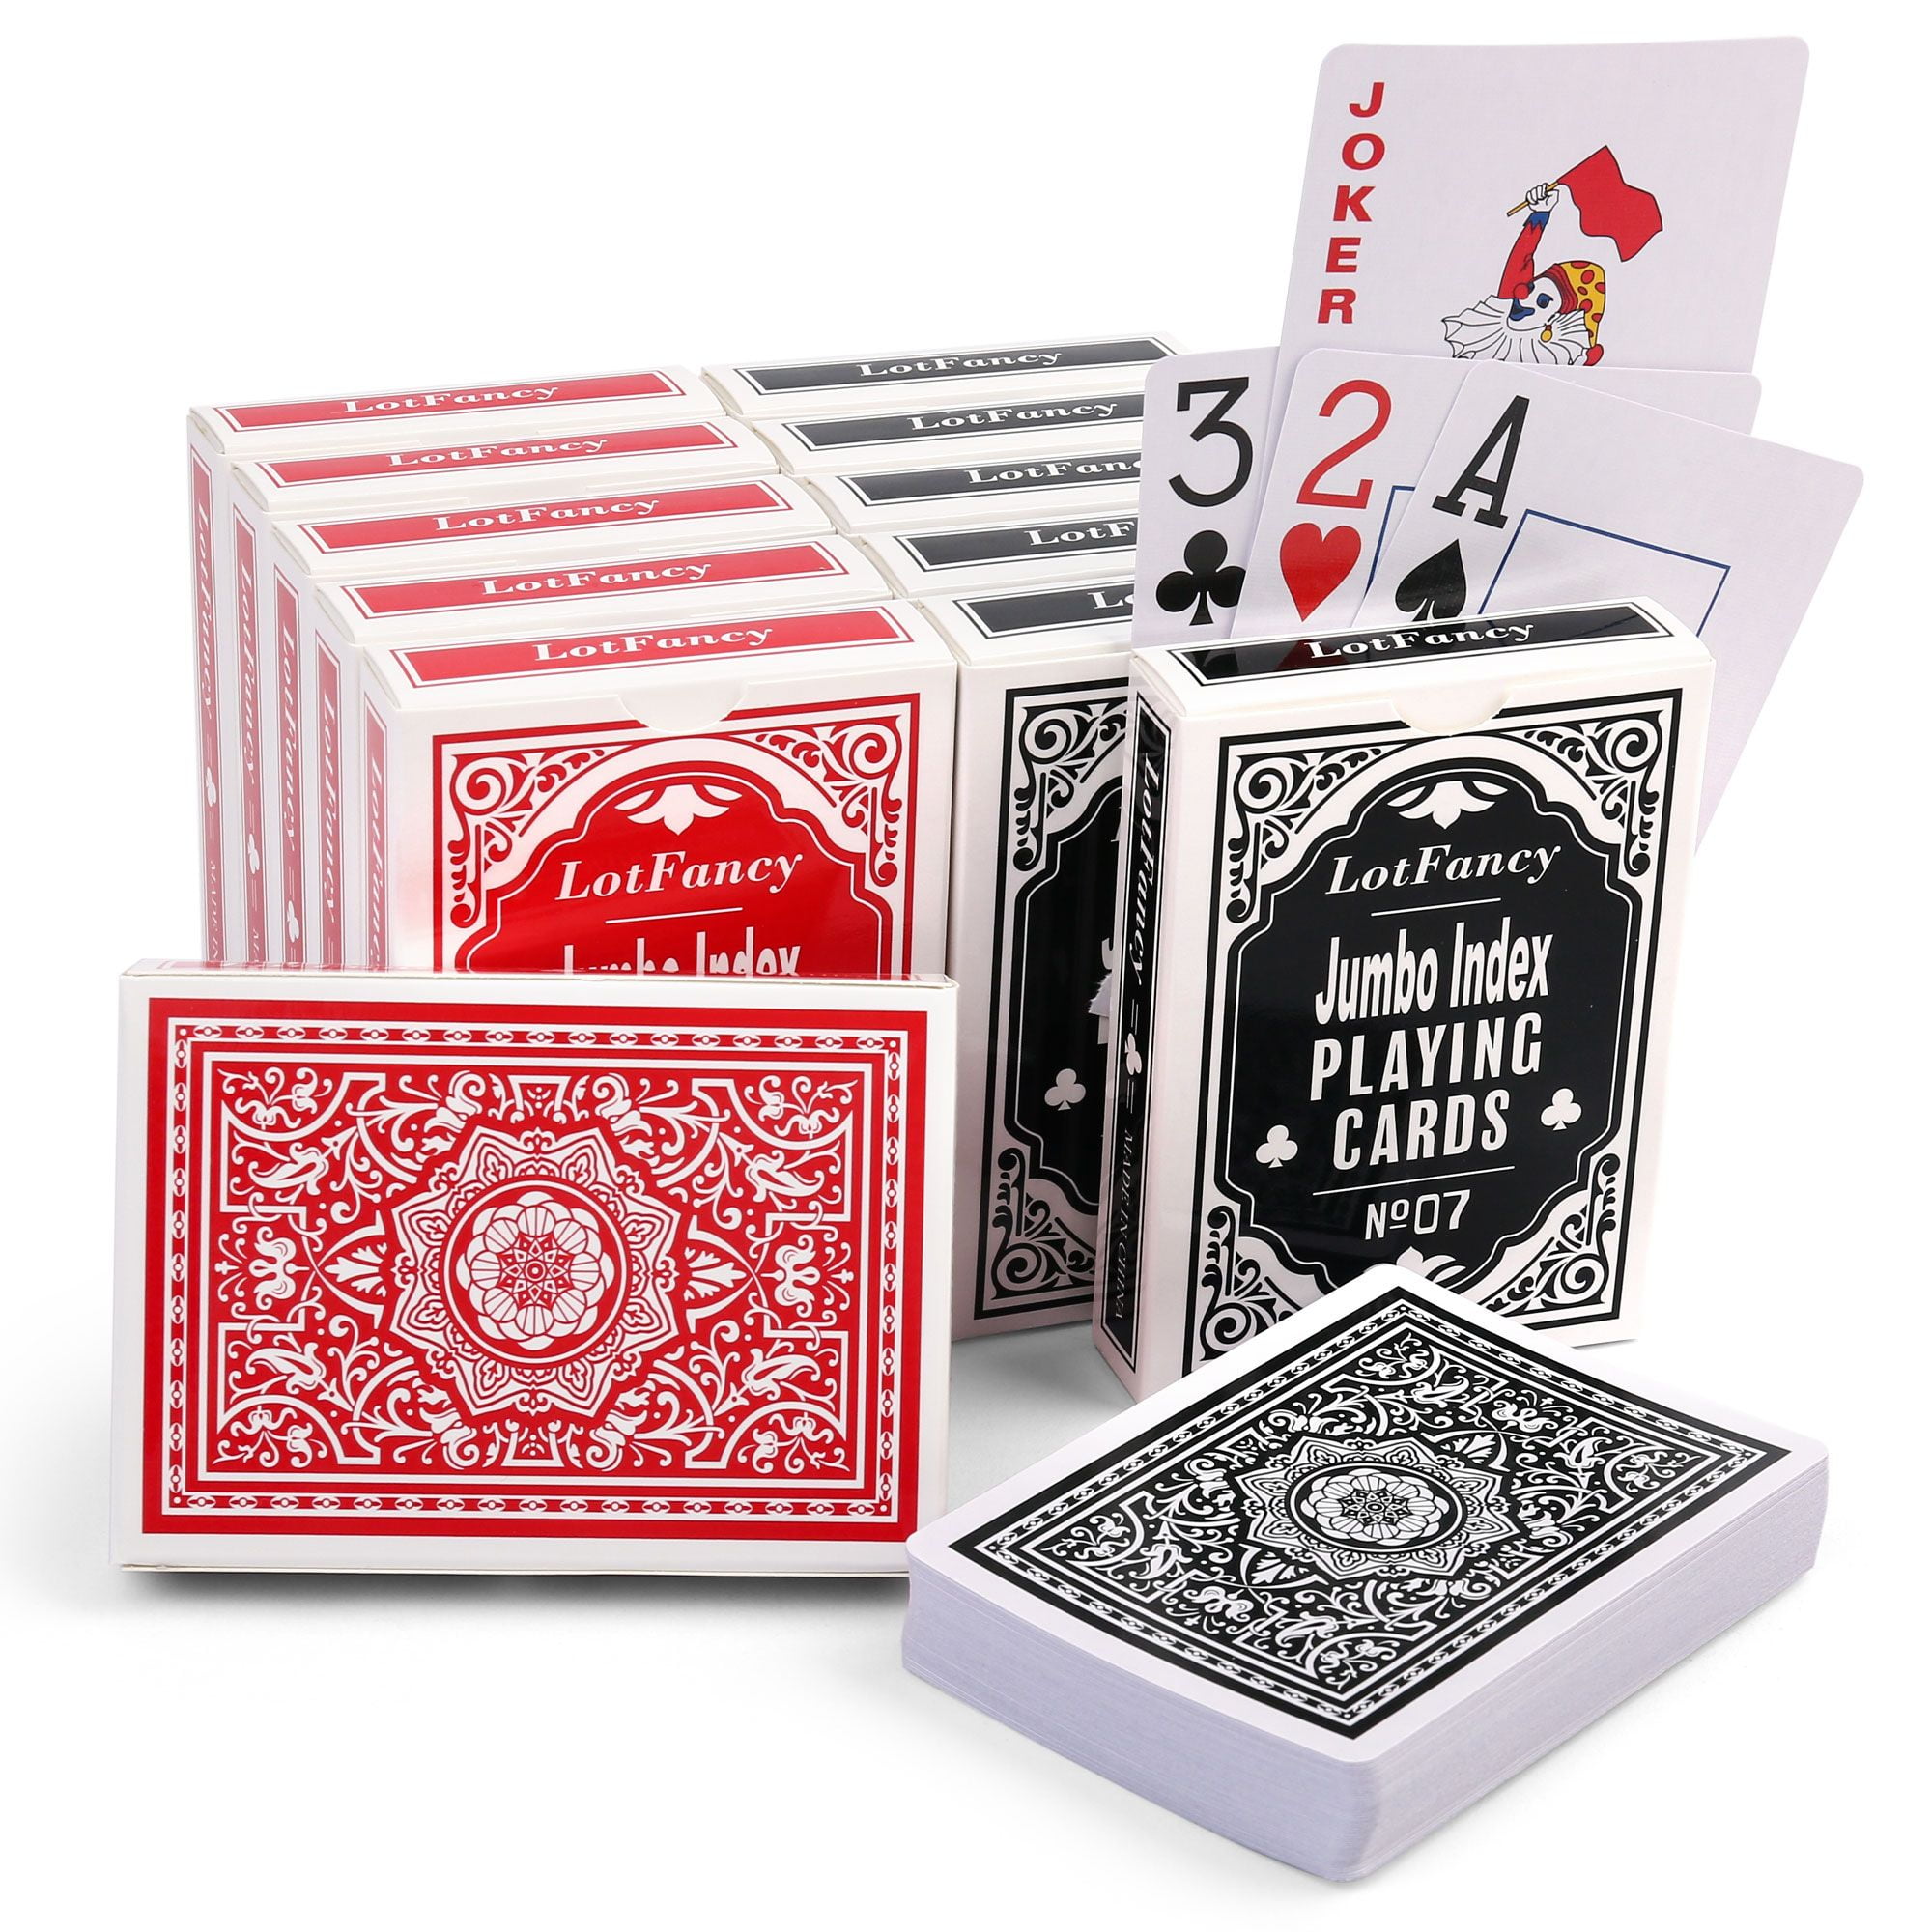 What Is Jumbo Index Playing Cards